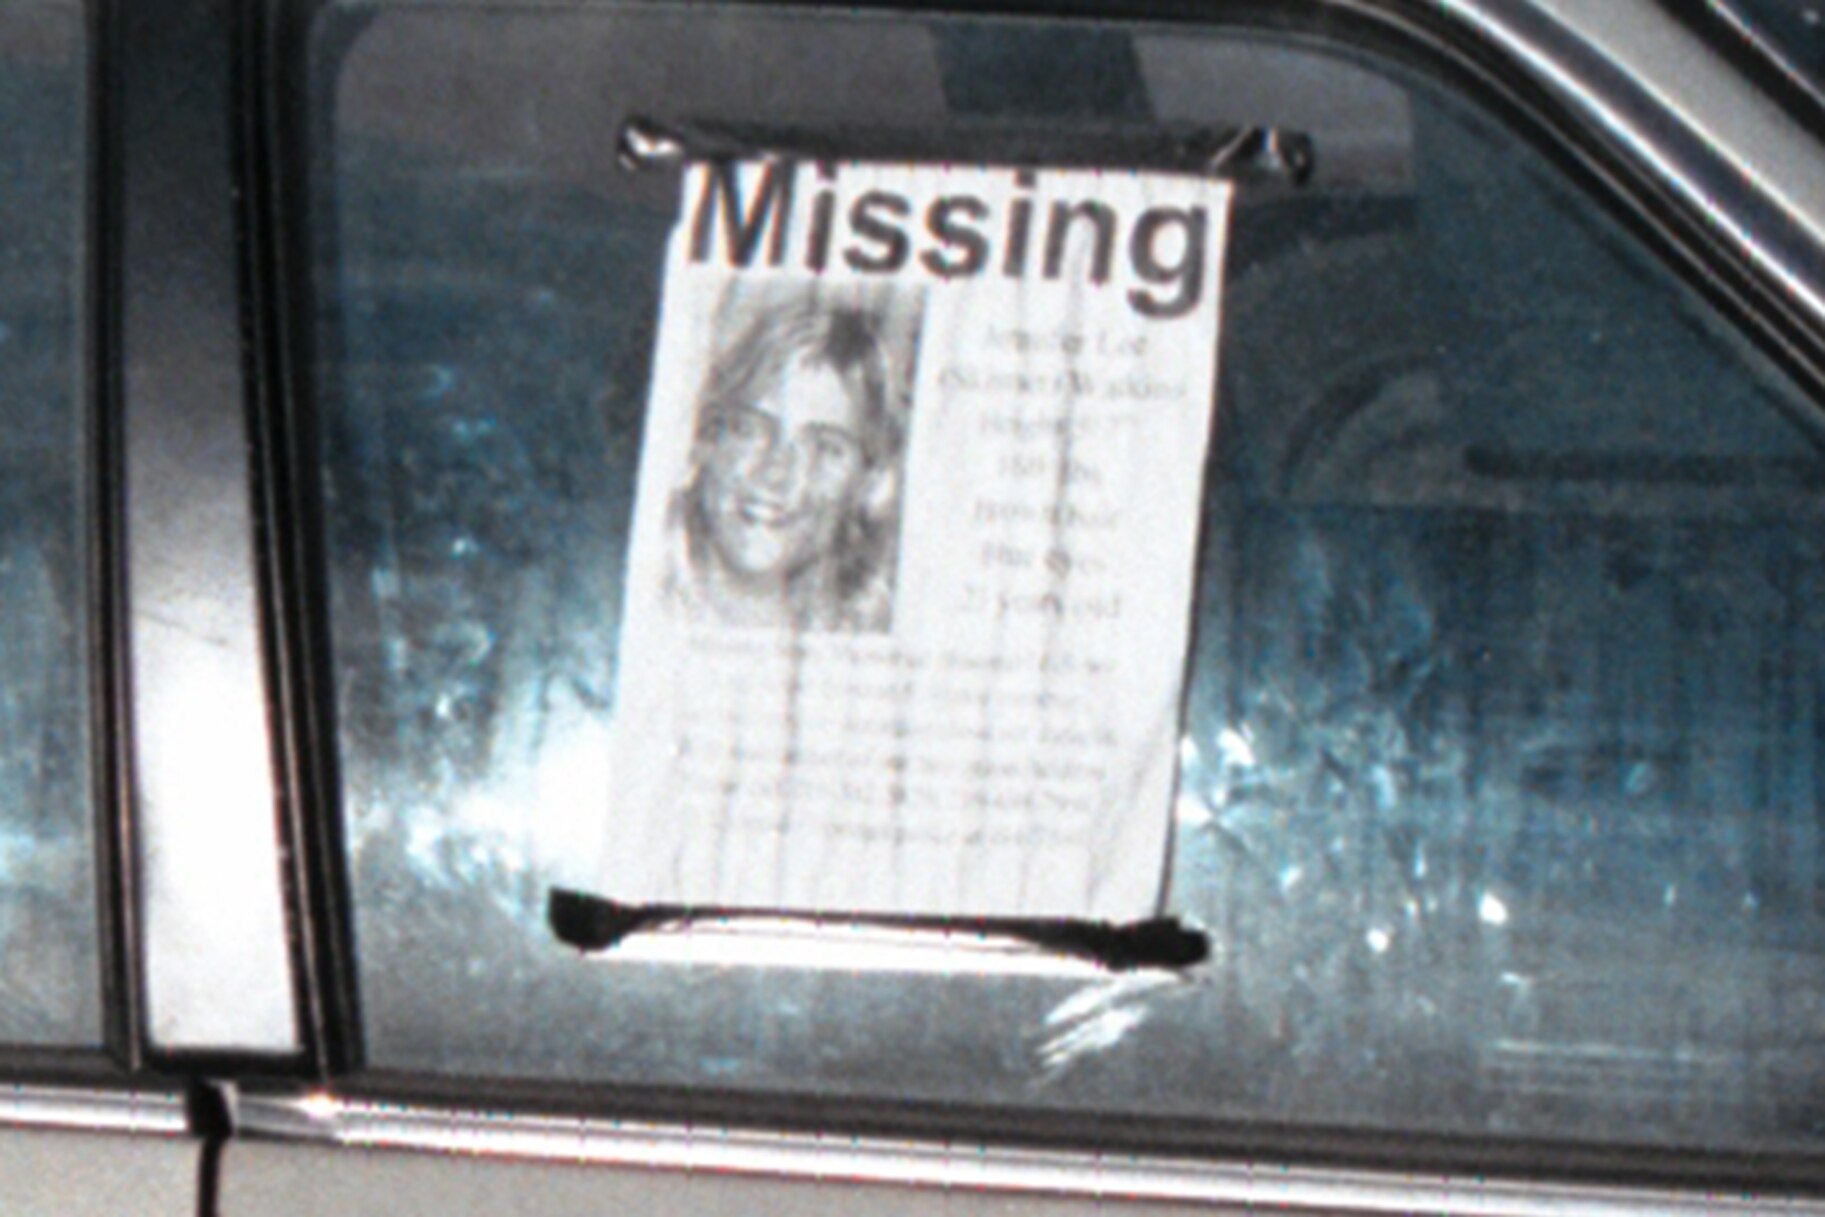 Missing Person Sign Murdered featured on By Morning